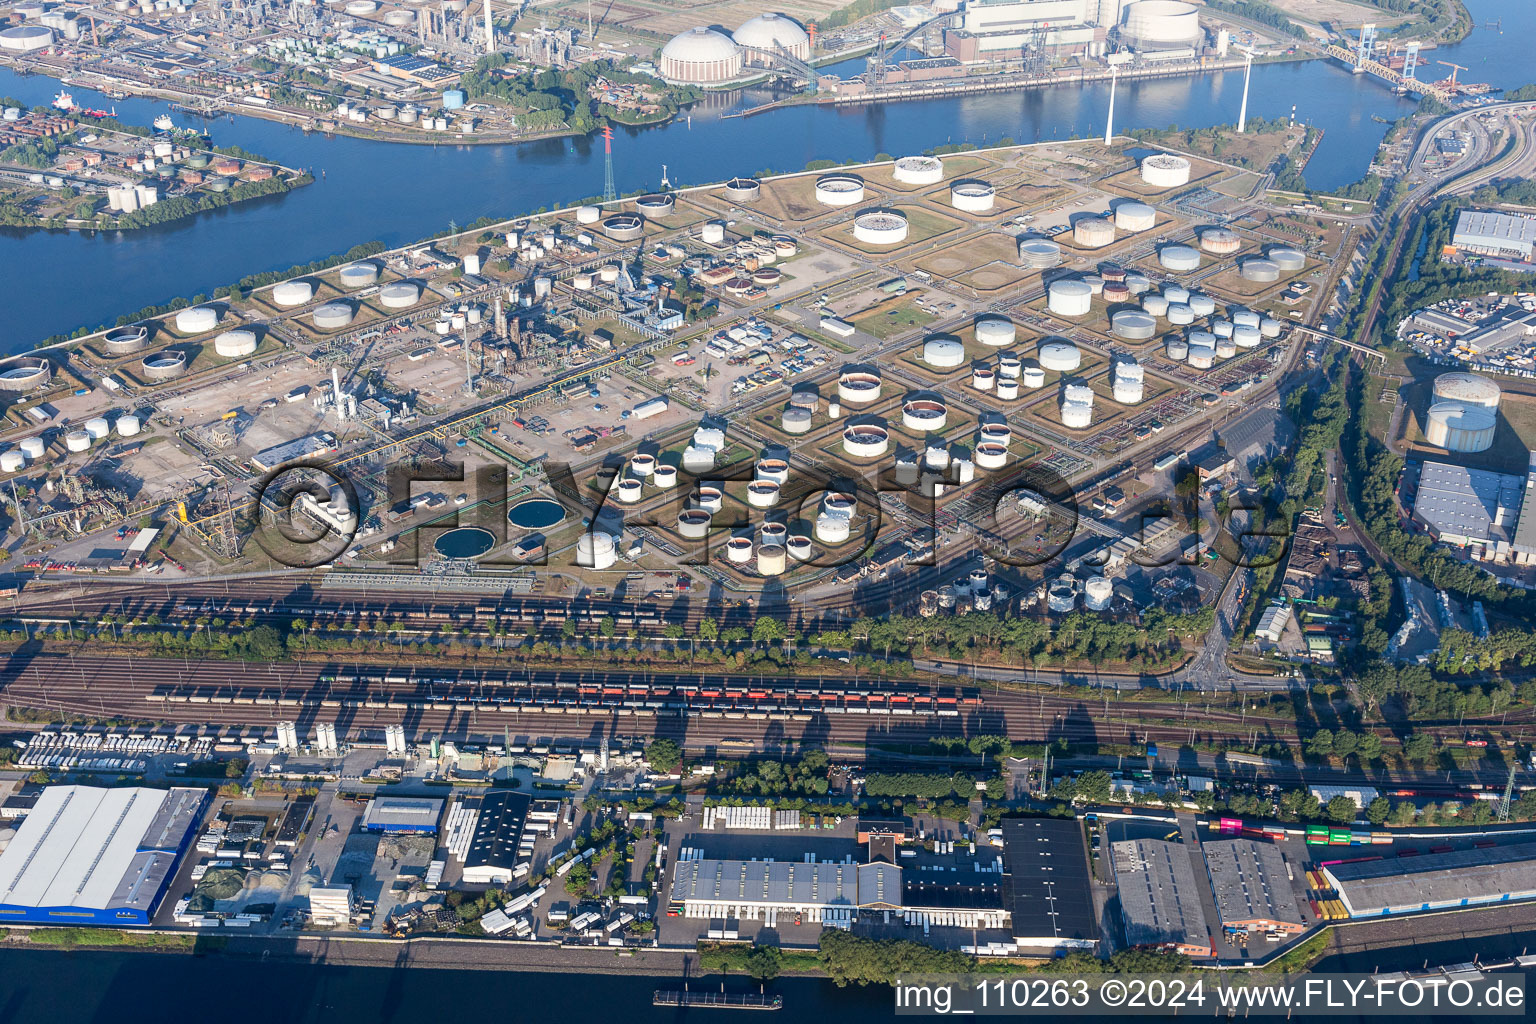 Mineral oil - tanks of Shell Technology Centre Hamburg on the sourthern Elbe in Hamburg, Germany